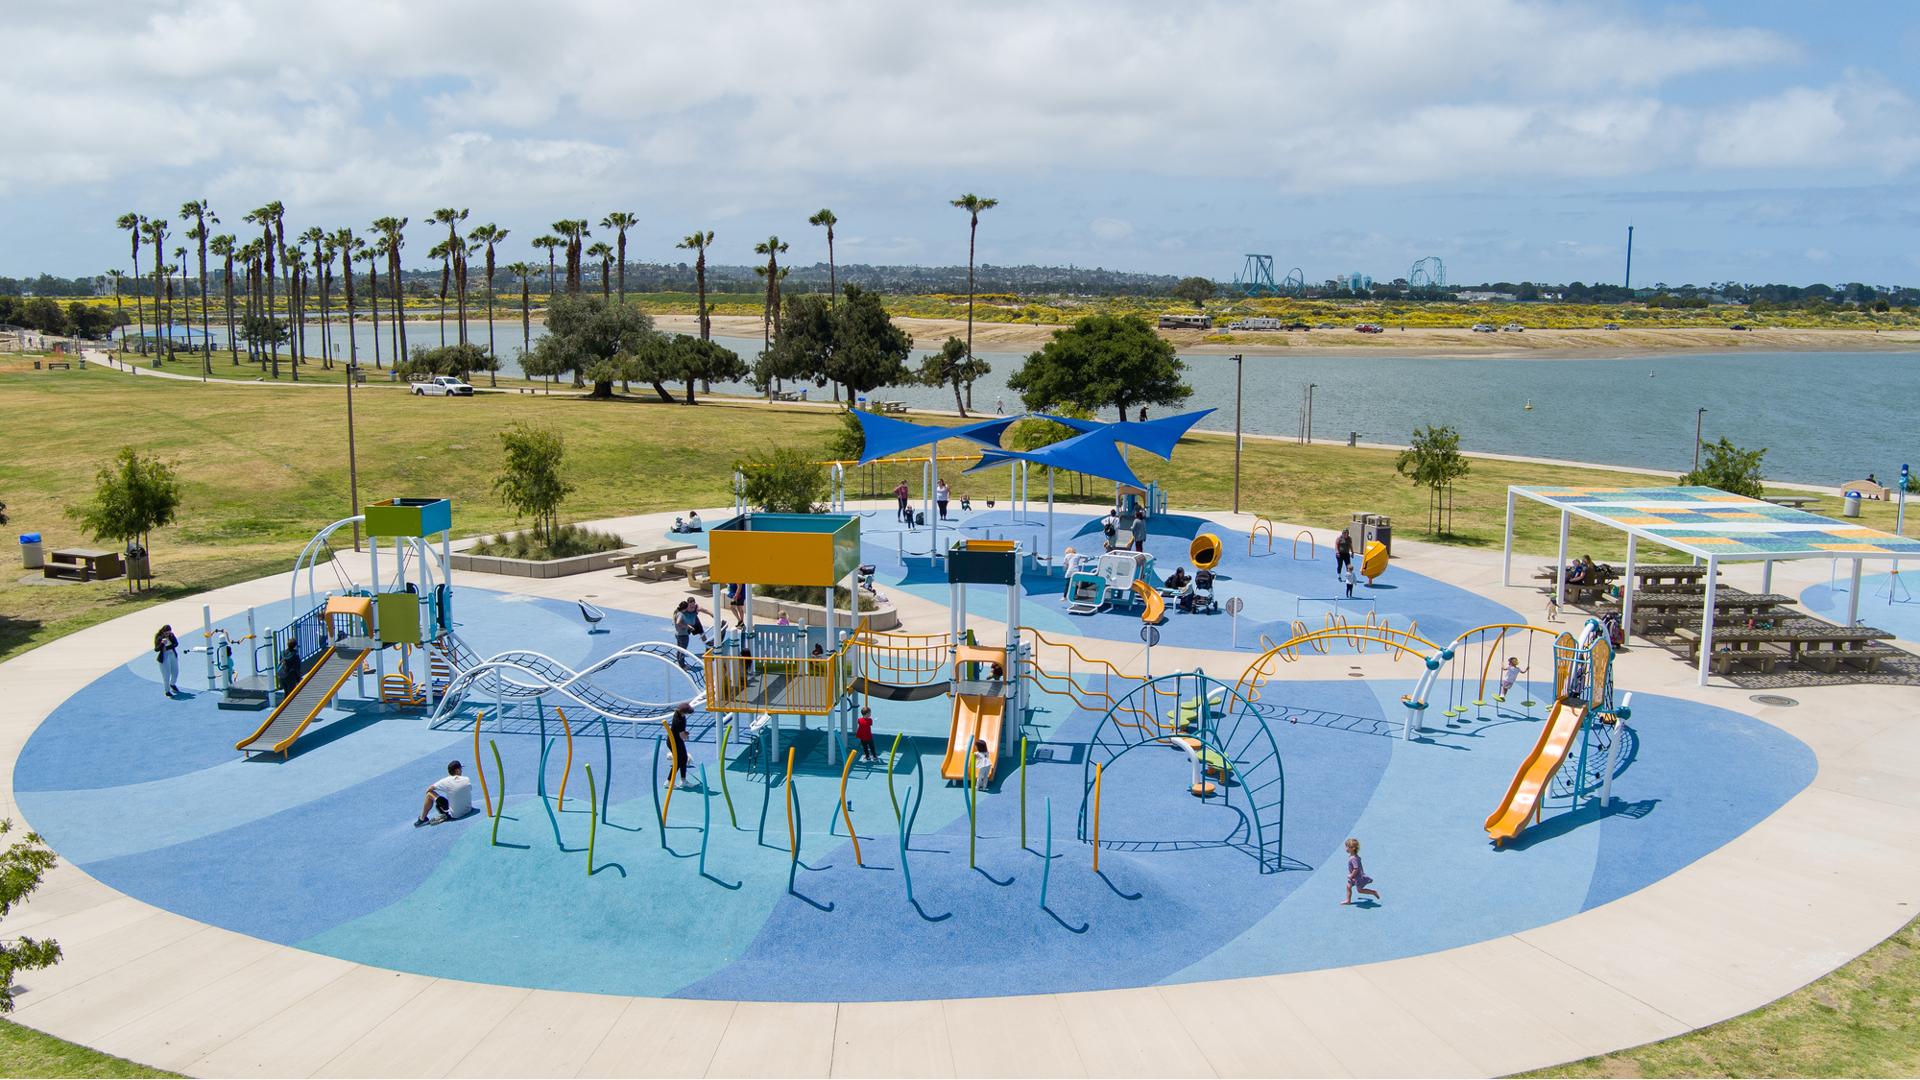 Full elevated view of a large circular play area with multiple play structures and stand alone activities all set next to a large body of water in the background.